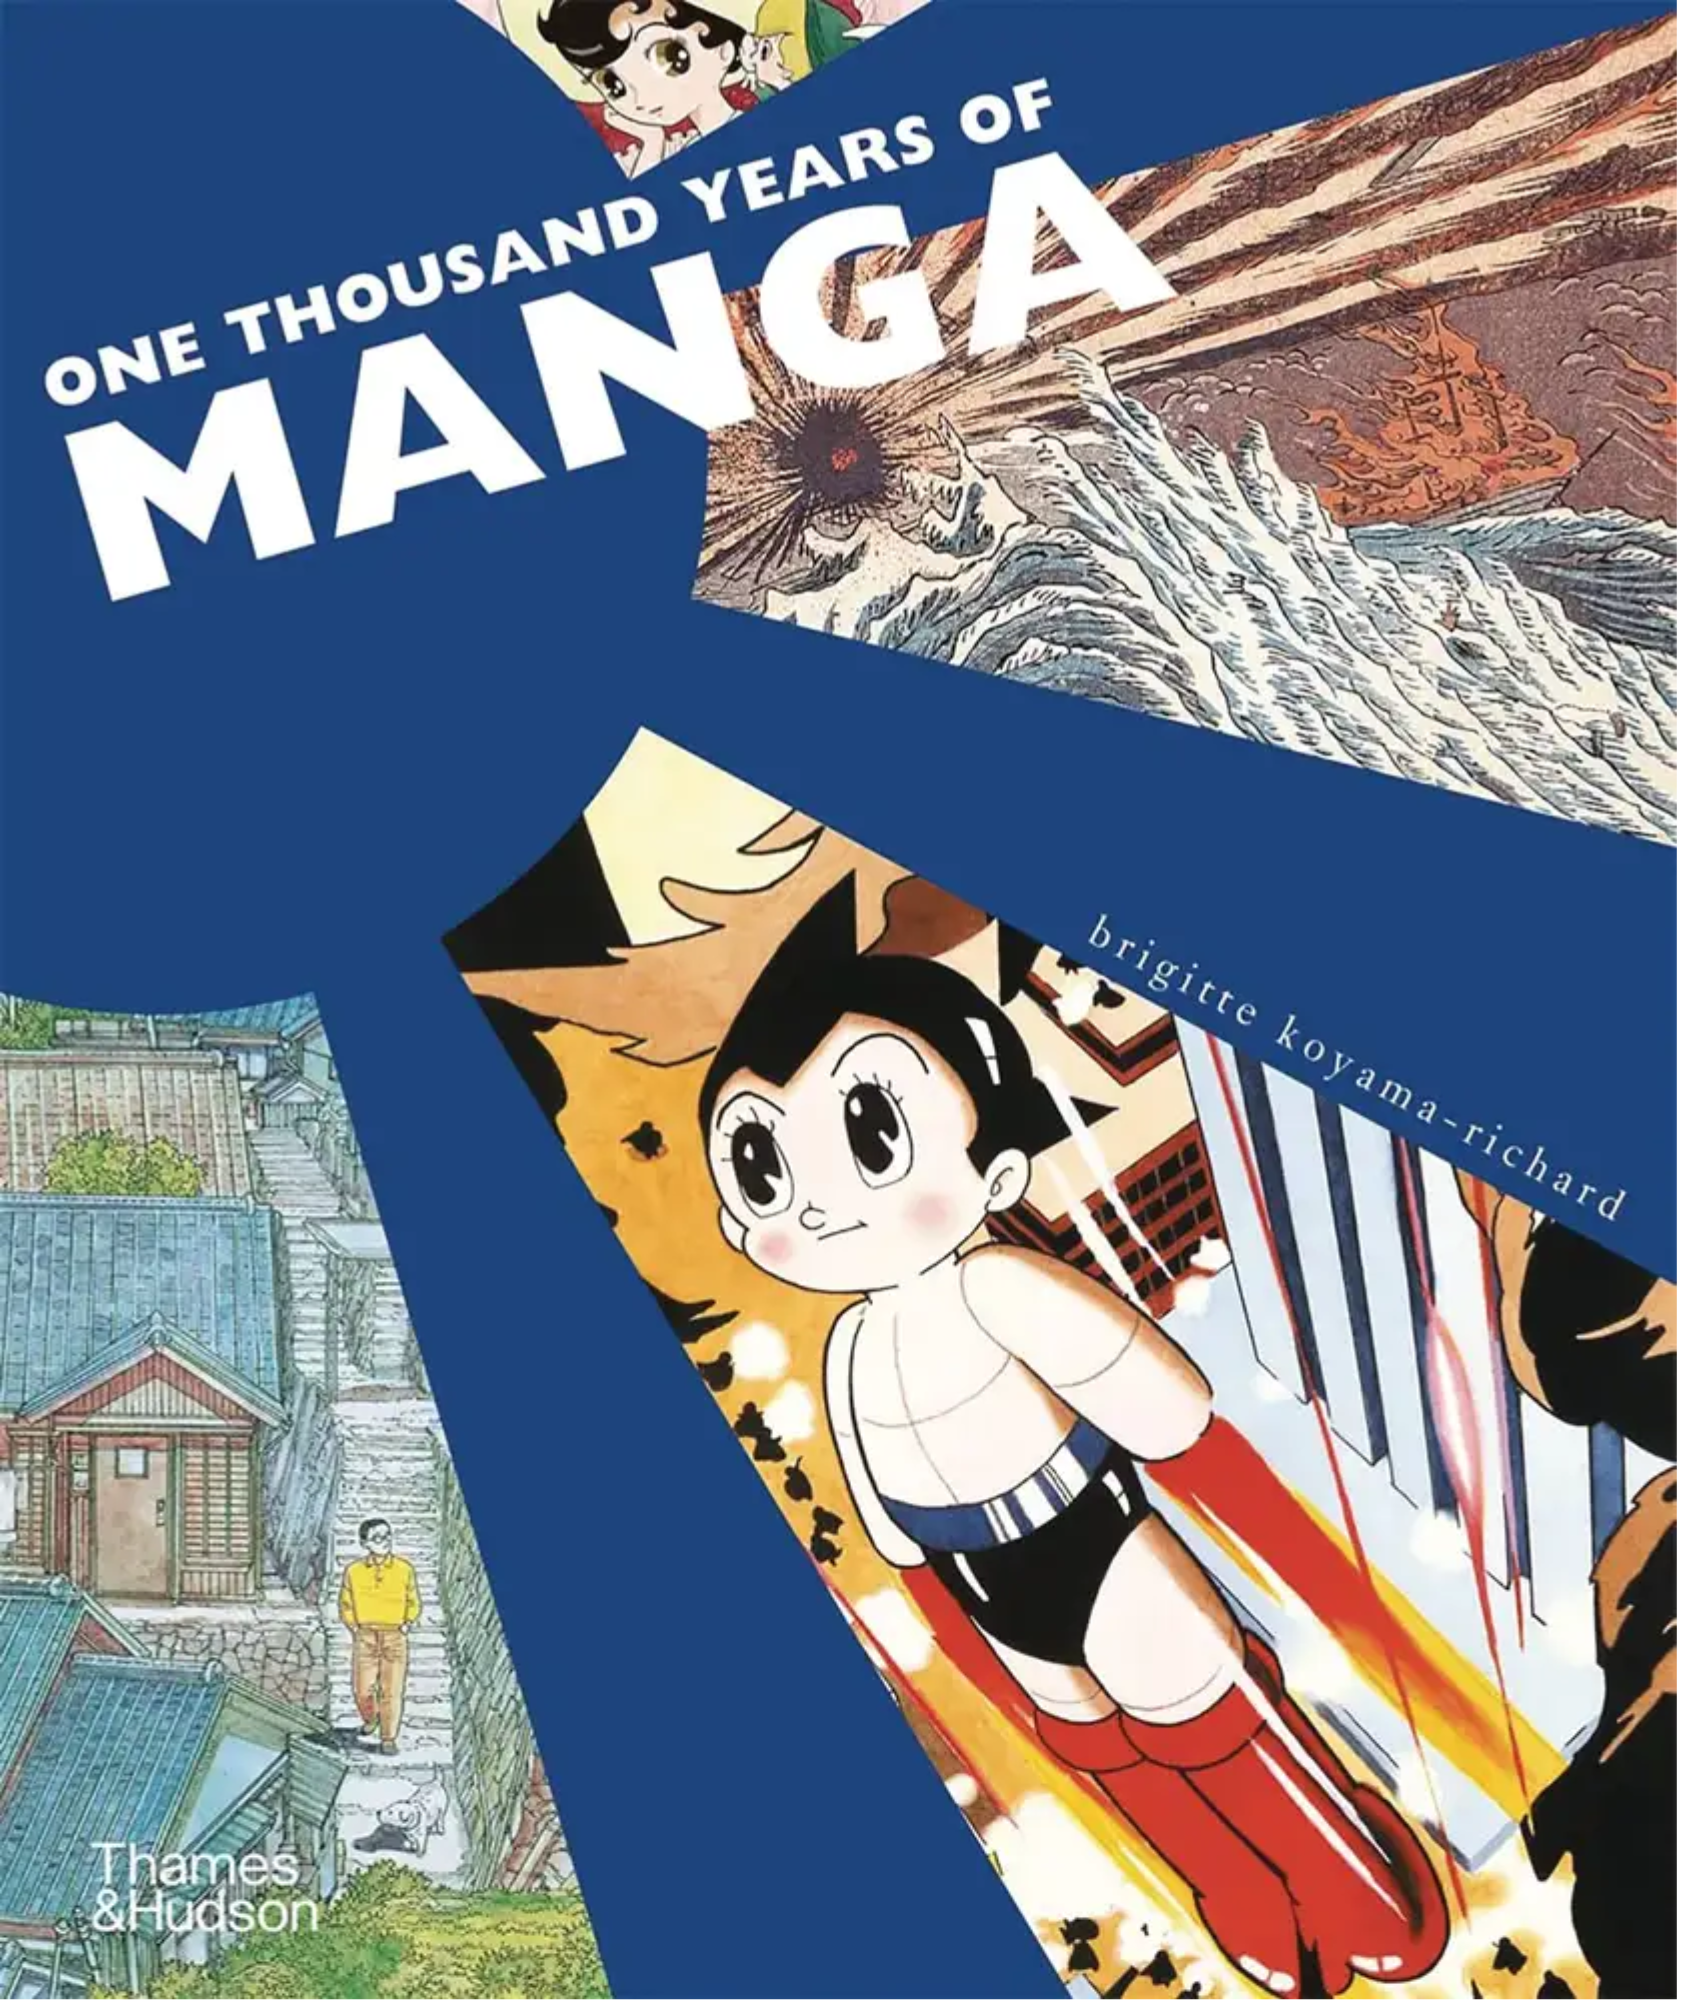 One Thousand Years of Manga book cover